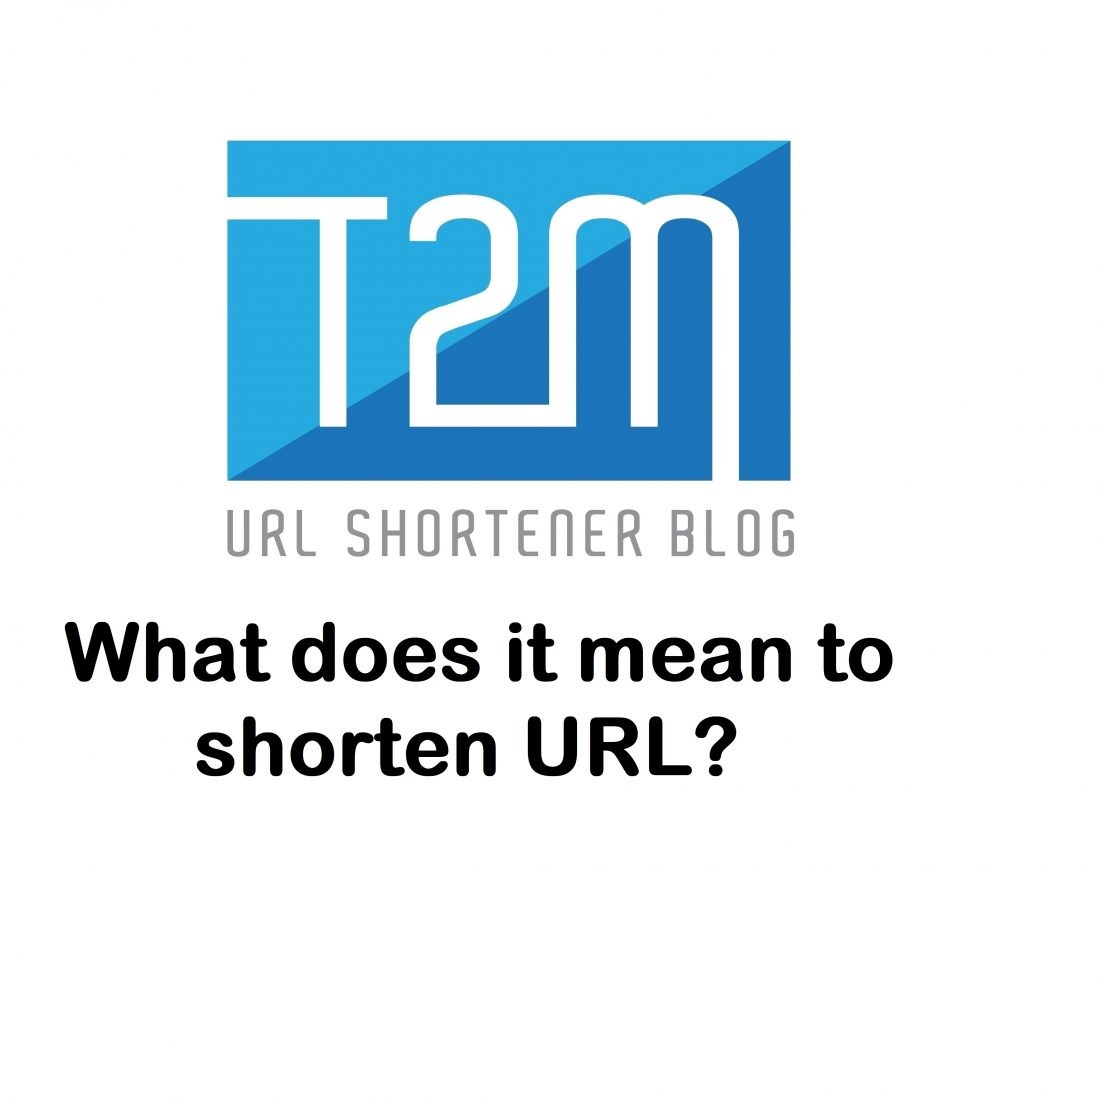 What does it mean to shorten URL?